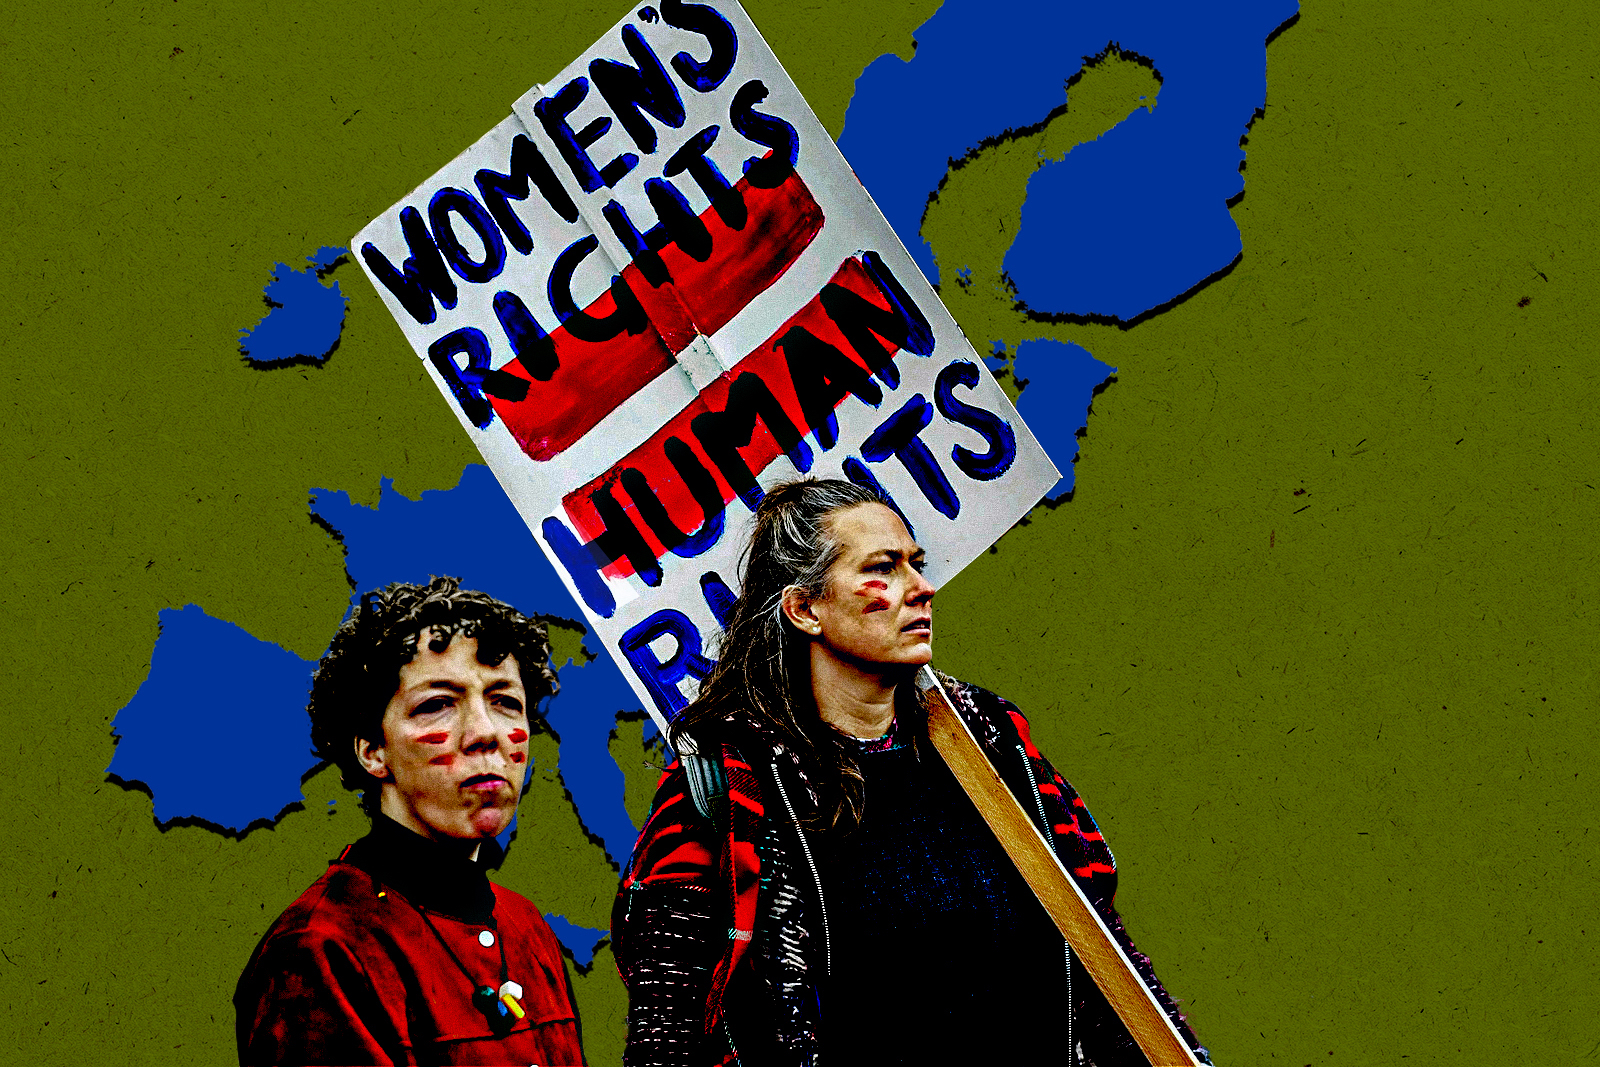 Women's rights campaigners